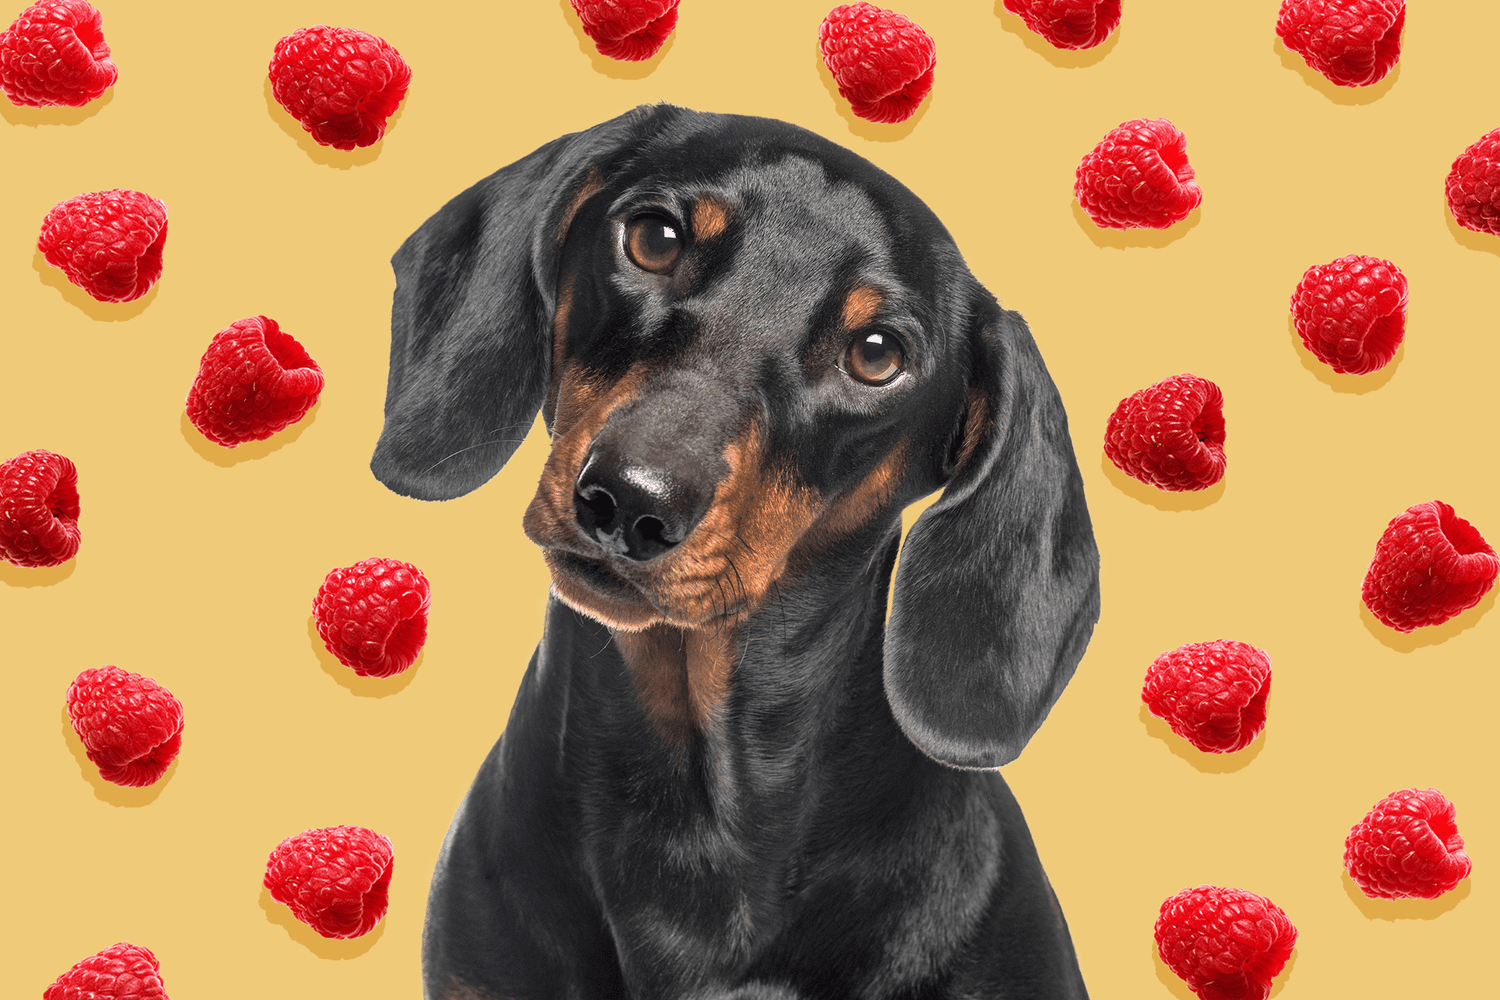 Can Dogs Eat Raspberries? Find Out If You Can Safely Share This Sweet Treat With Your Pup